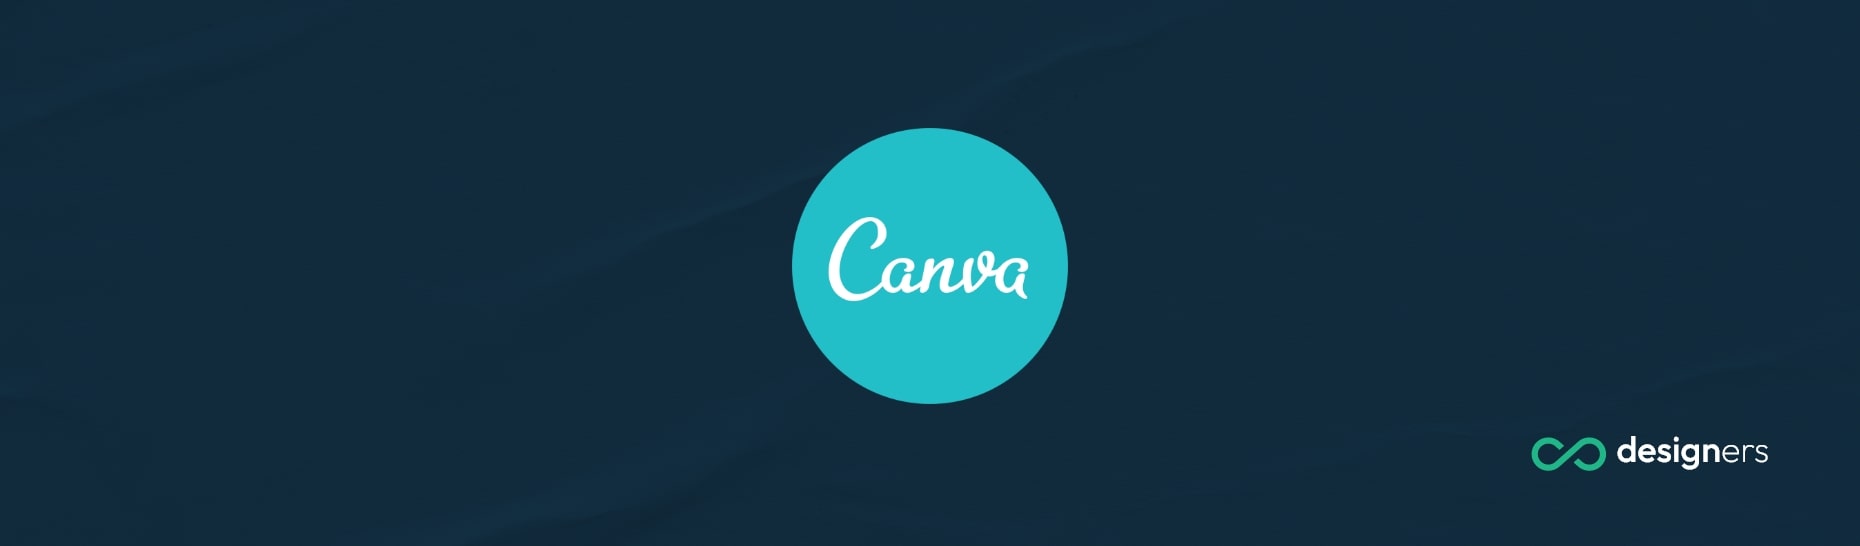 Does Canva Print on Magnets?